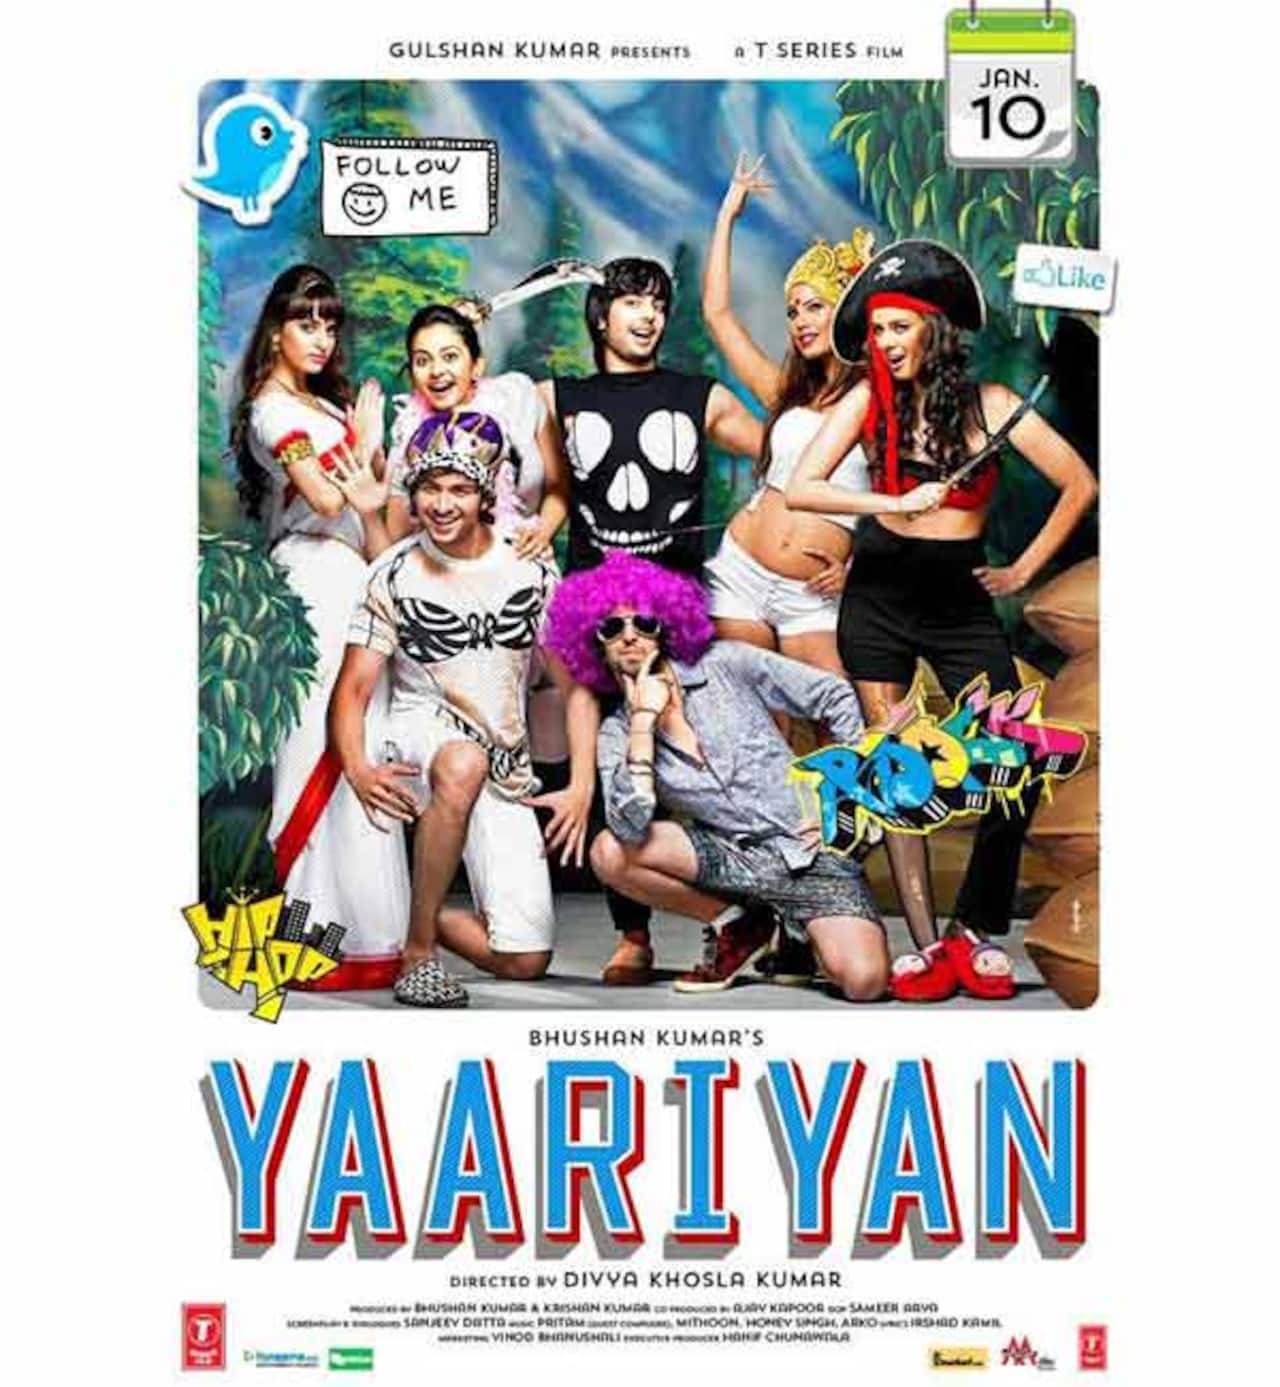 Yaariyan music review: Put on your party shoes and dance!